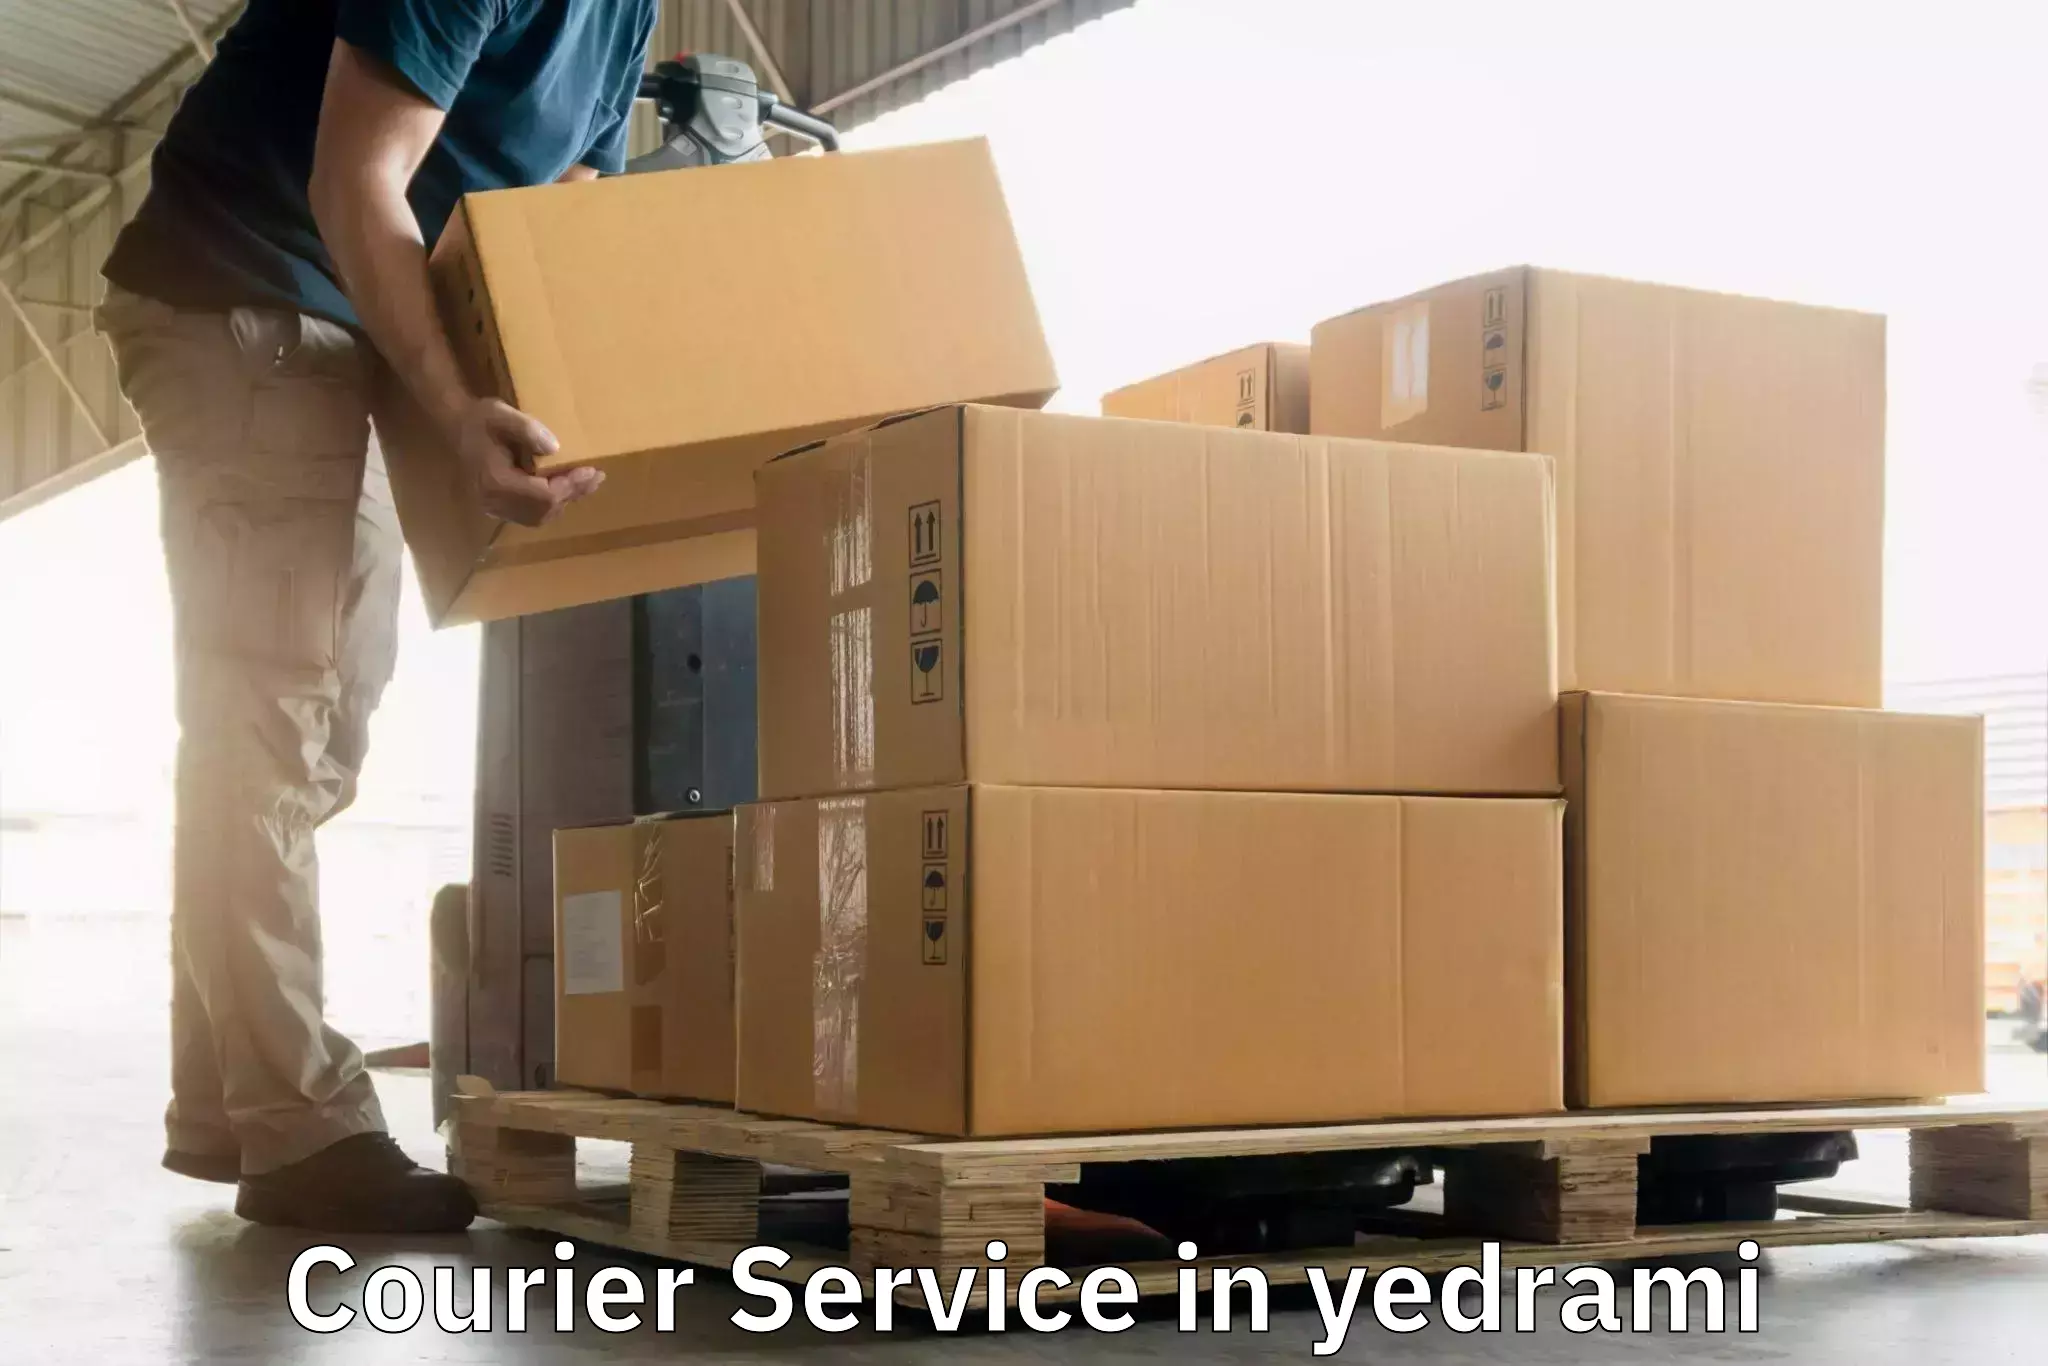 Comprehensive parcel tracking in yedrami